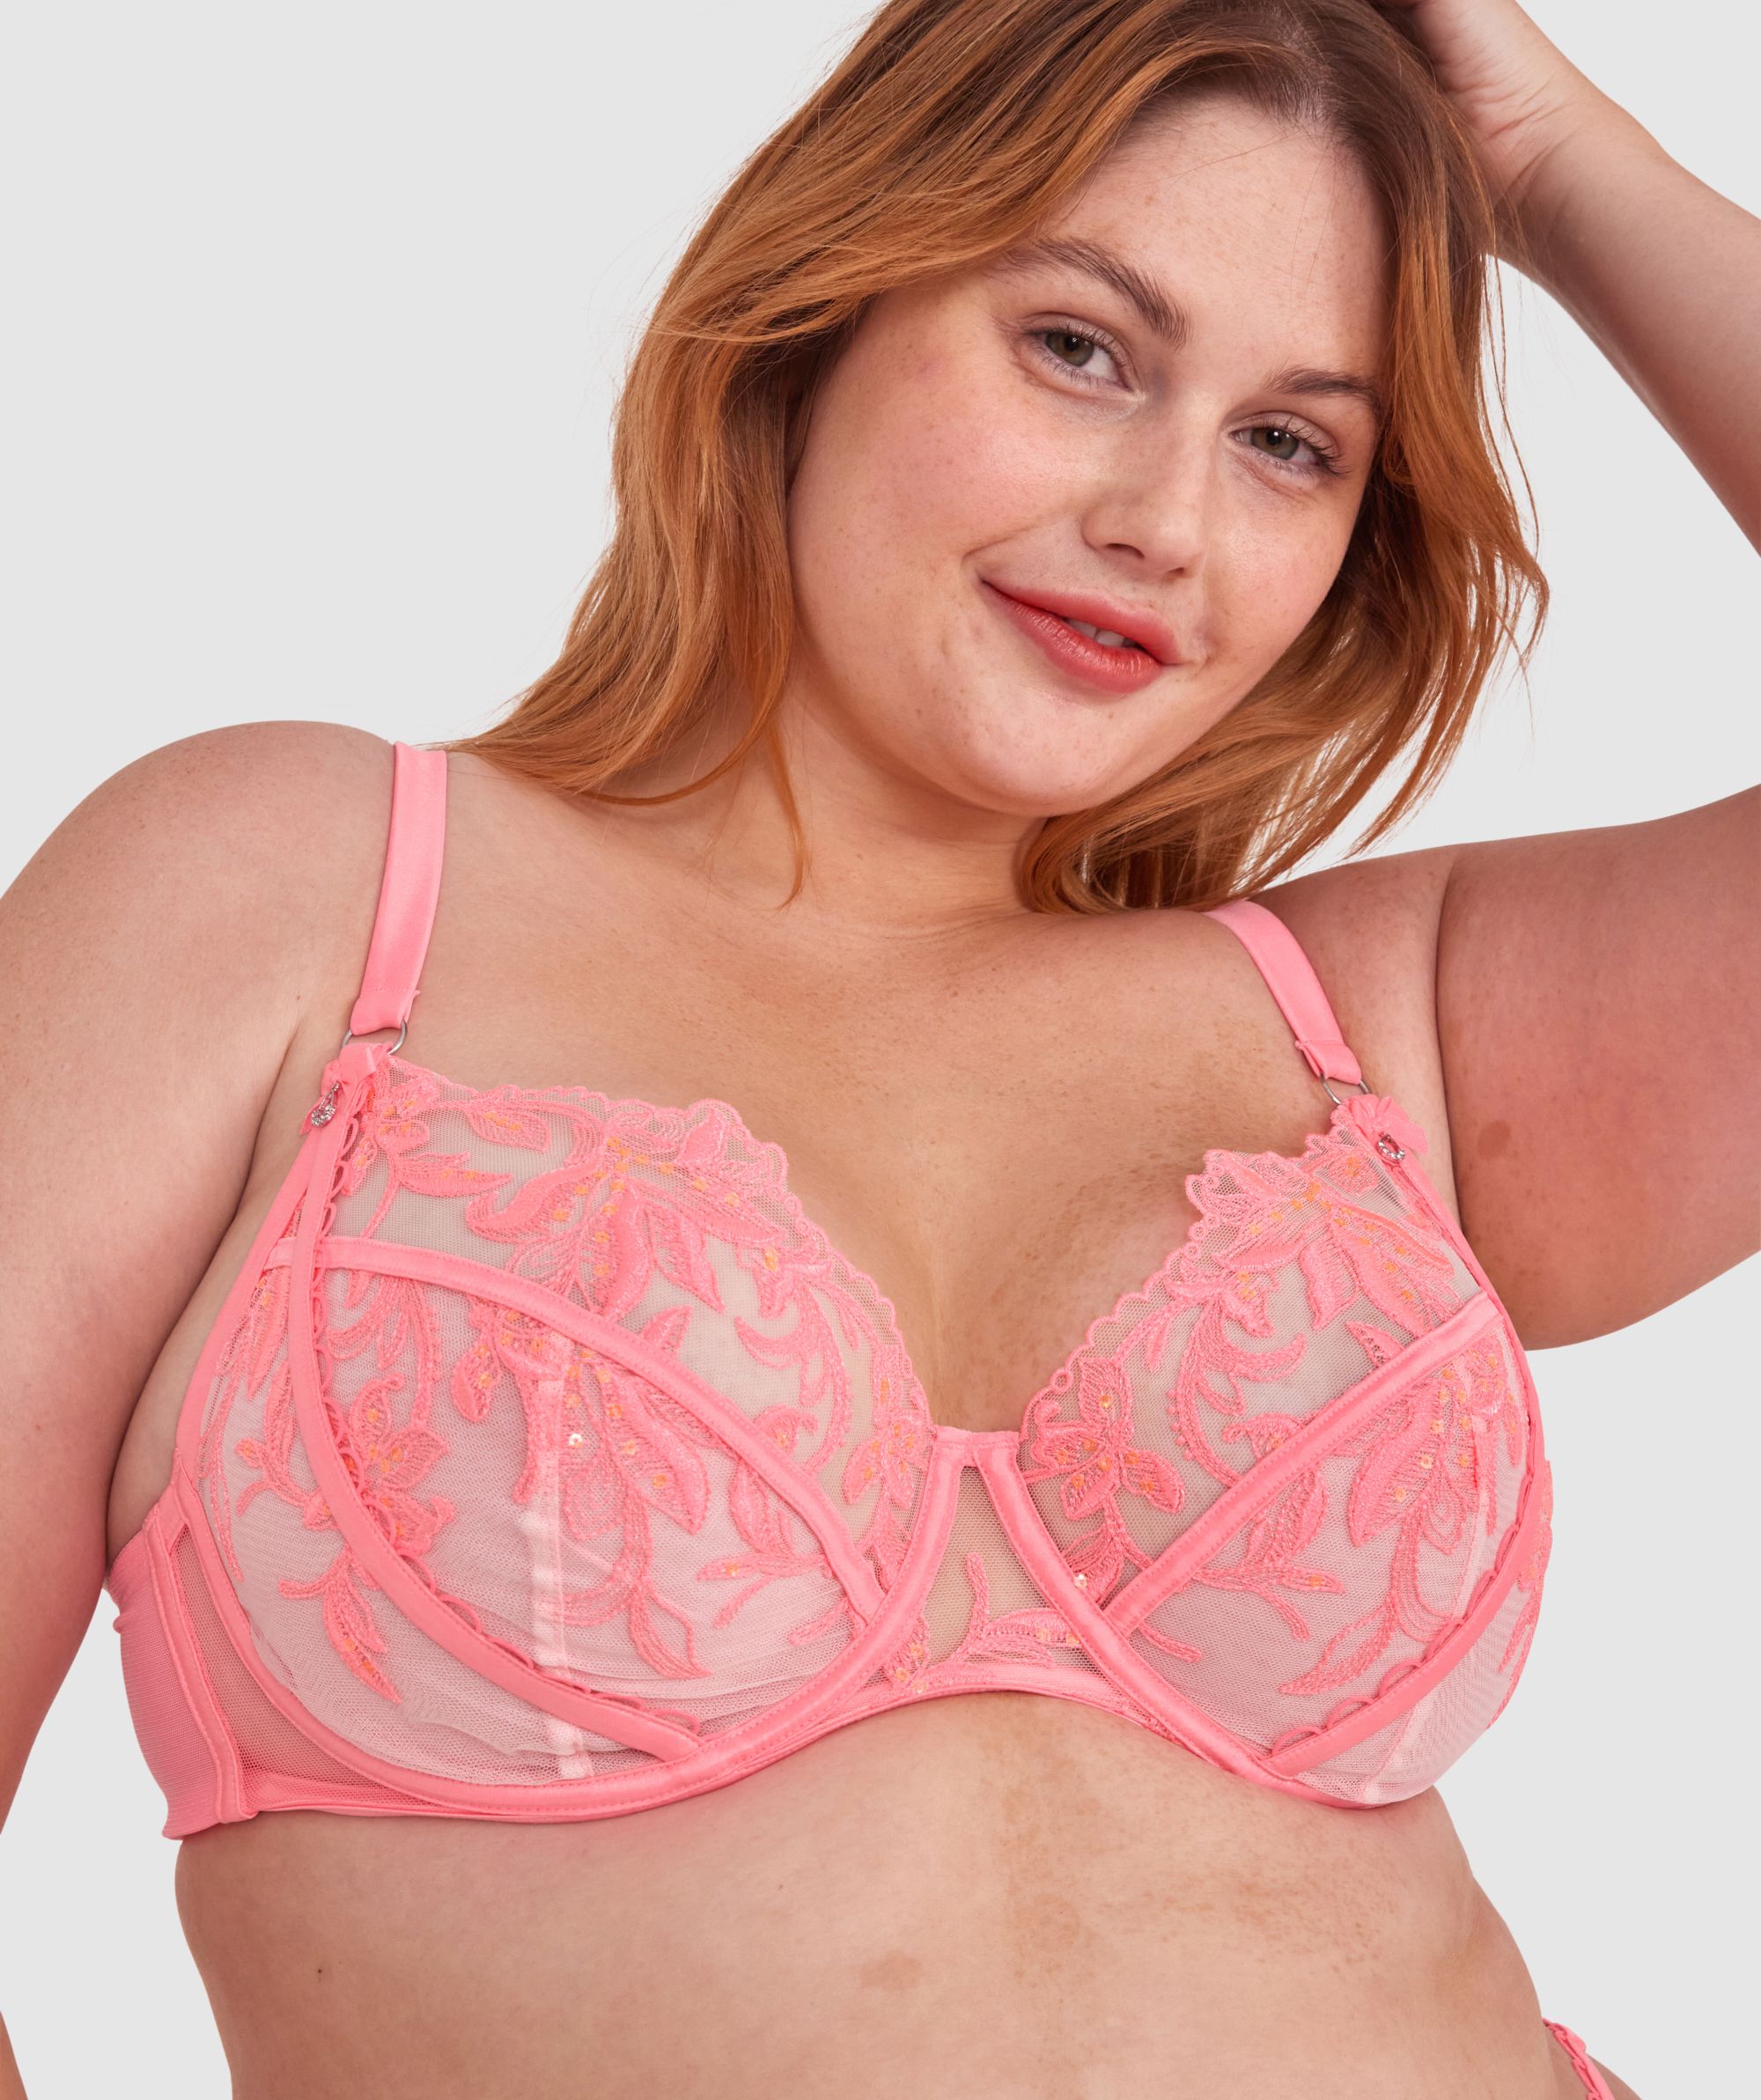 New Bra Size 38 B Pink - $22 New With Tags - From Josephine